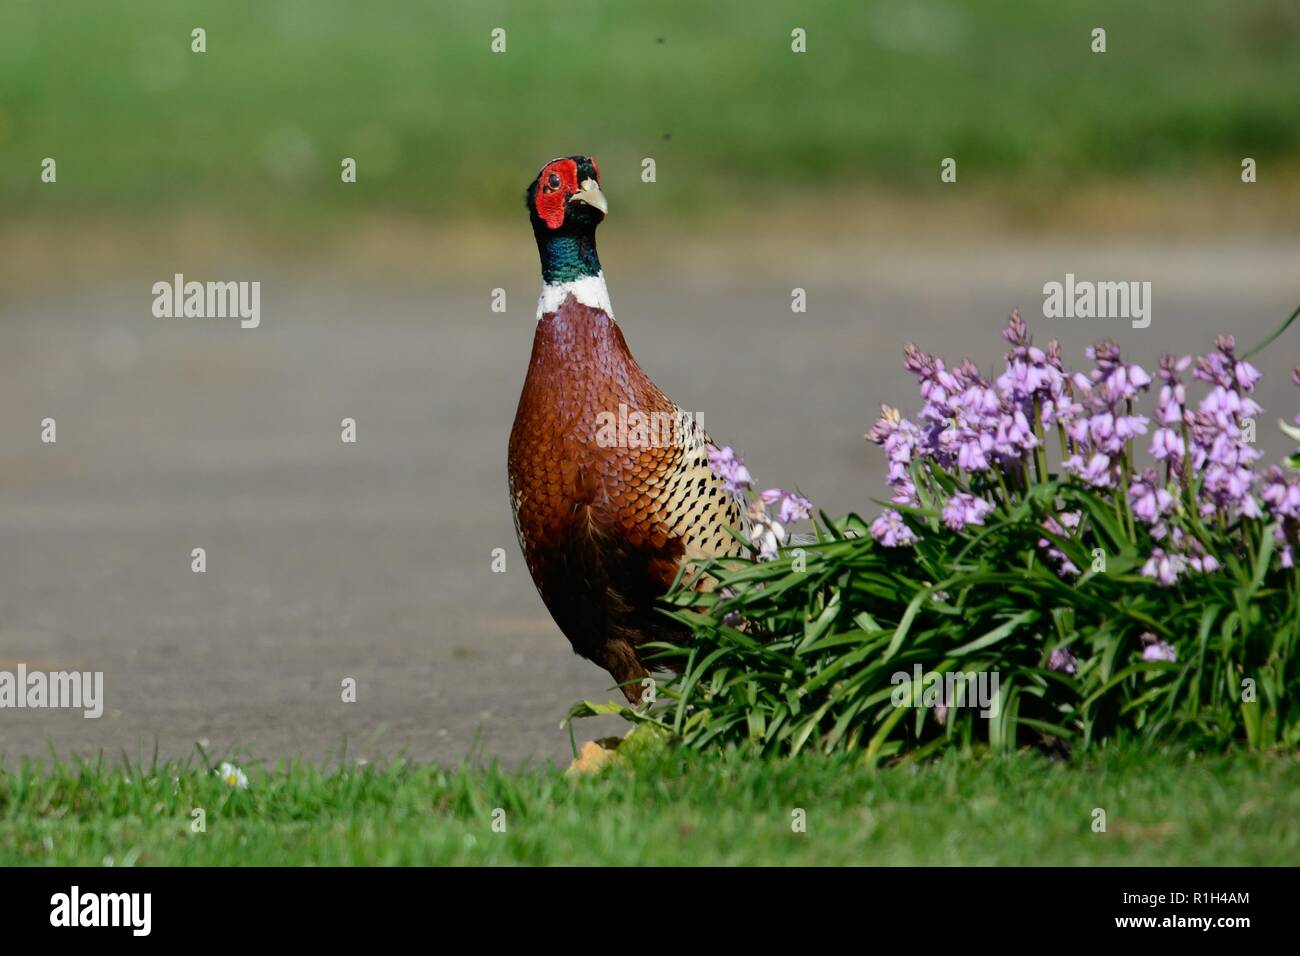 Porttrait of a common pheasant (phasianus colchicus) walking past a flowerbed in the garden Stock Photo